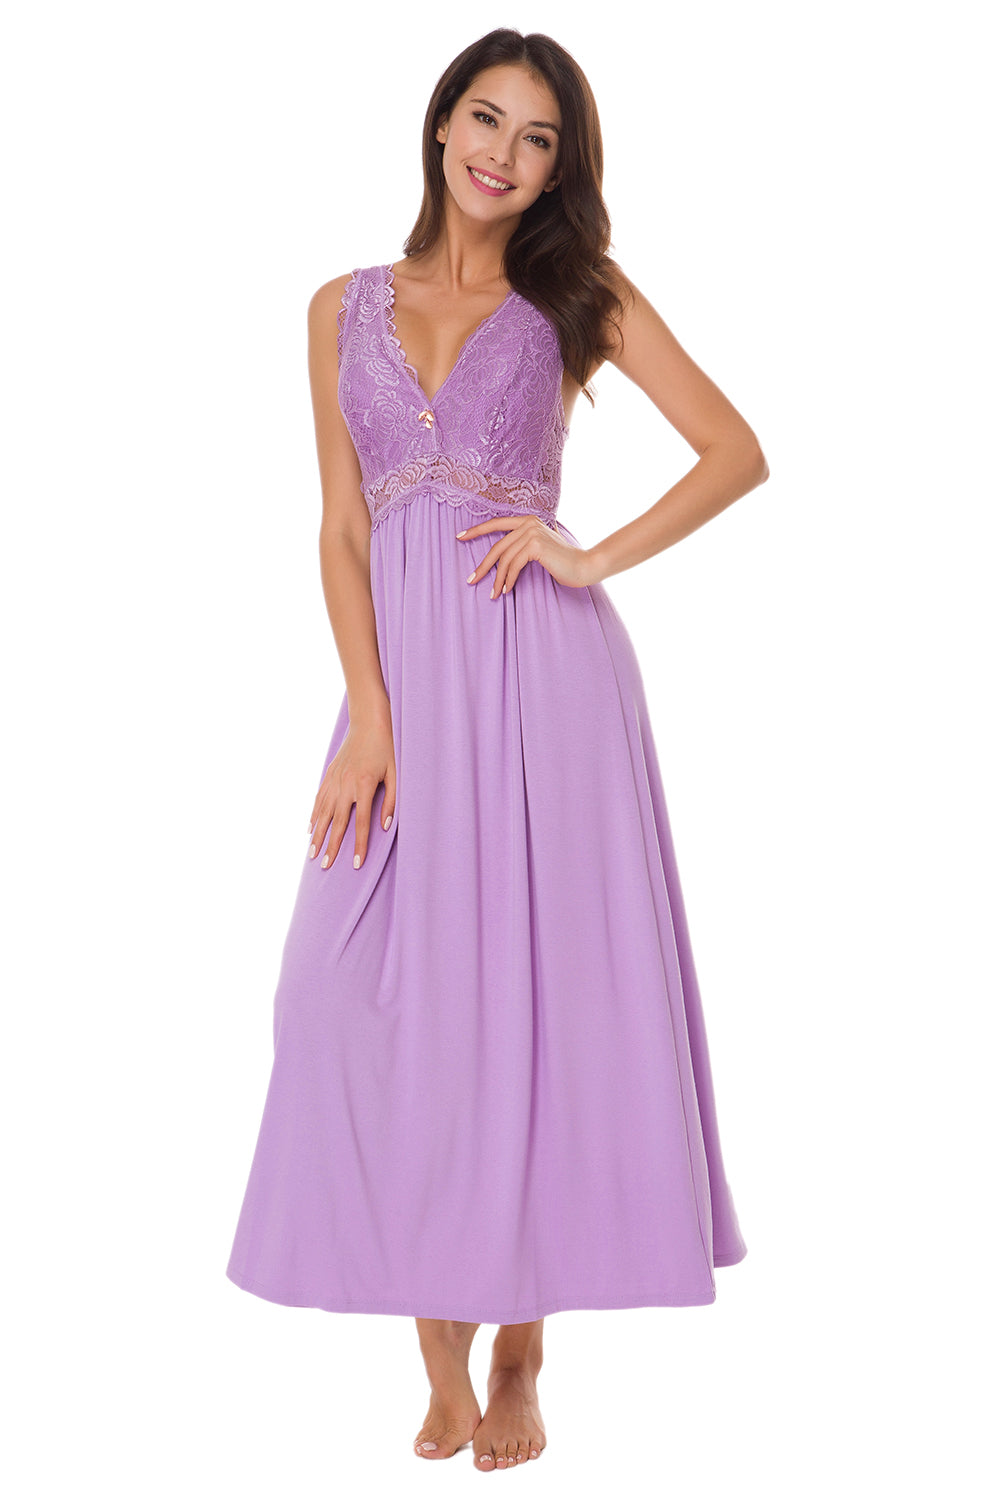 Sexy Lace Jersey  Elegant Long Nightgown Chemises Lavender